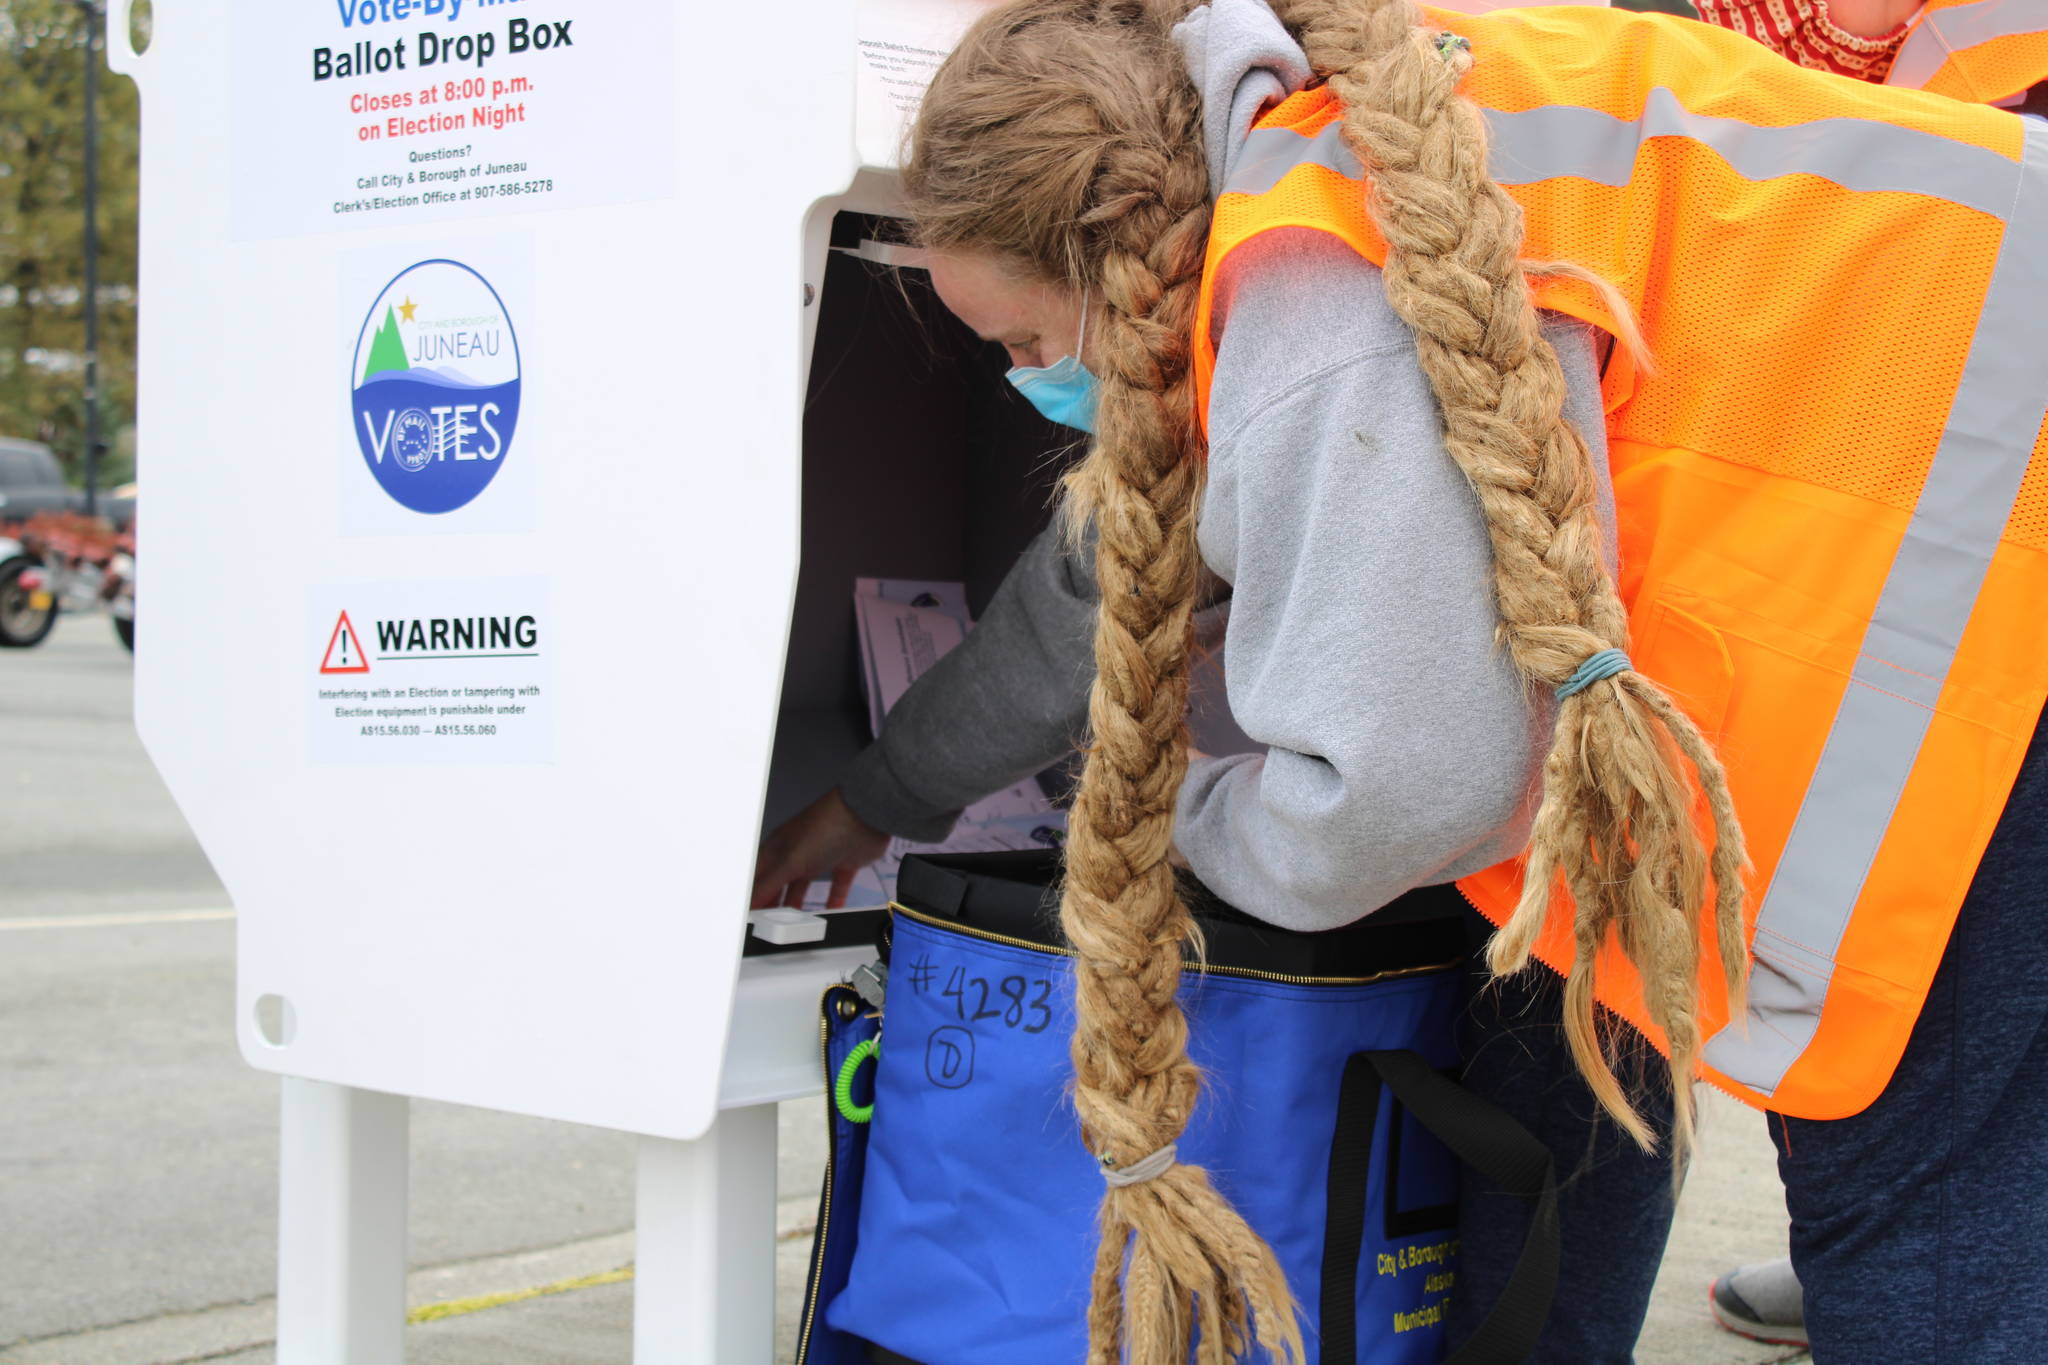 Deputy City Clerk Di Cathcart collects ballots from the ballot drop box at Don D. Statter Harbor the afternoon of Saturday, Sept. 19. Ballot drop boxes could factor into future municipal elections, too, depending on direction from the assembly. (Ben Hohenstatt / Juneau Empire)